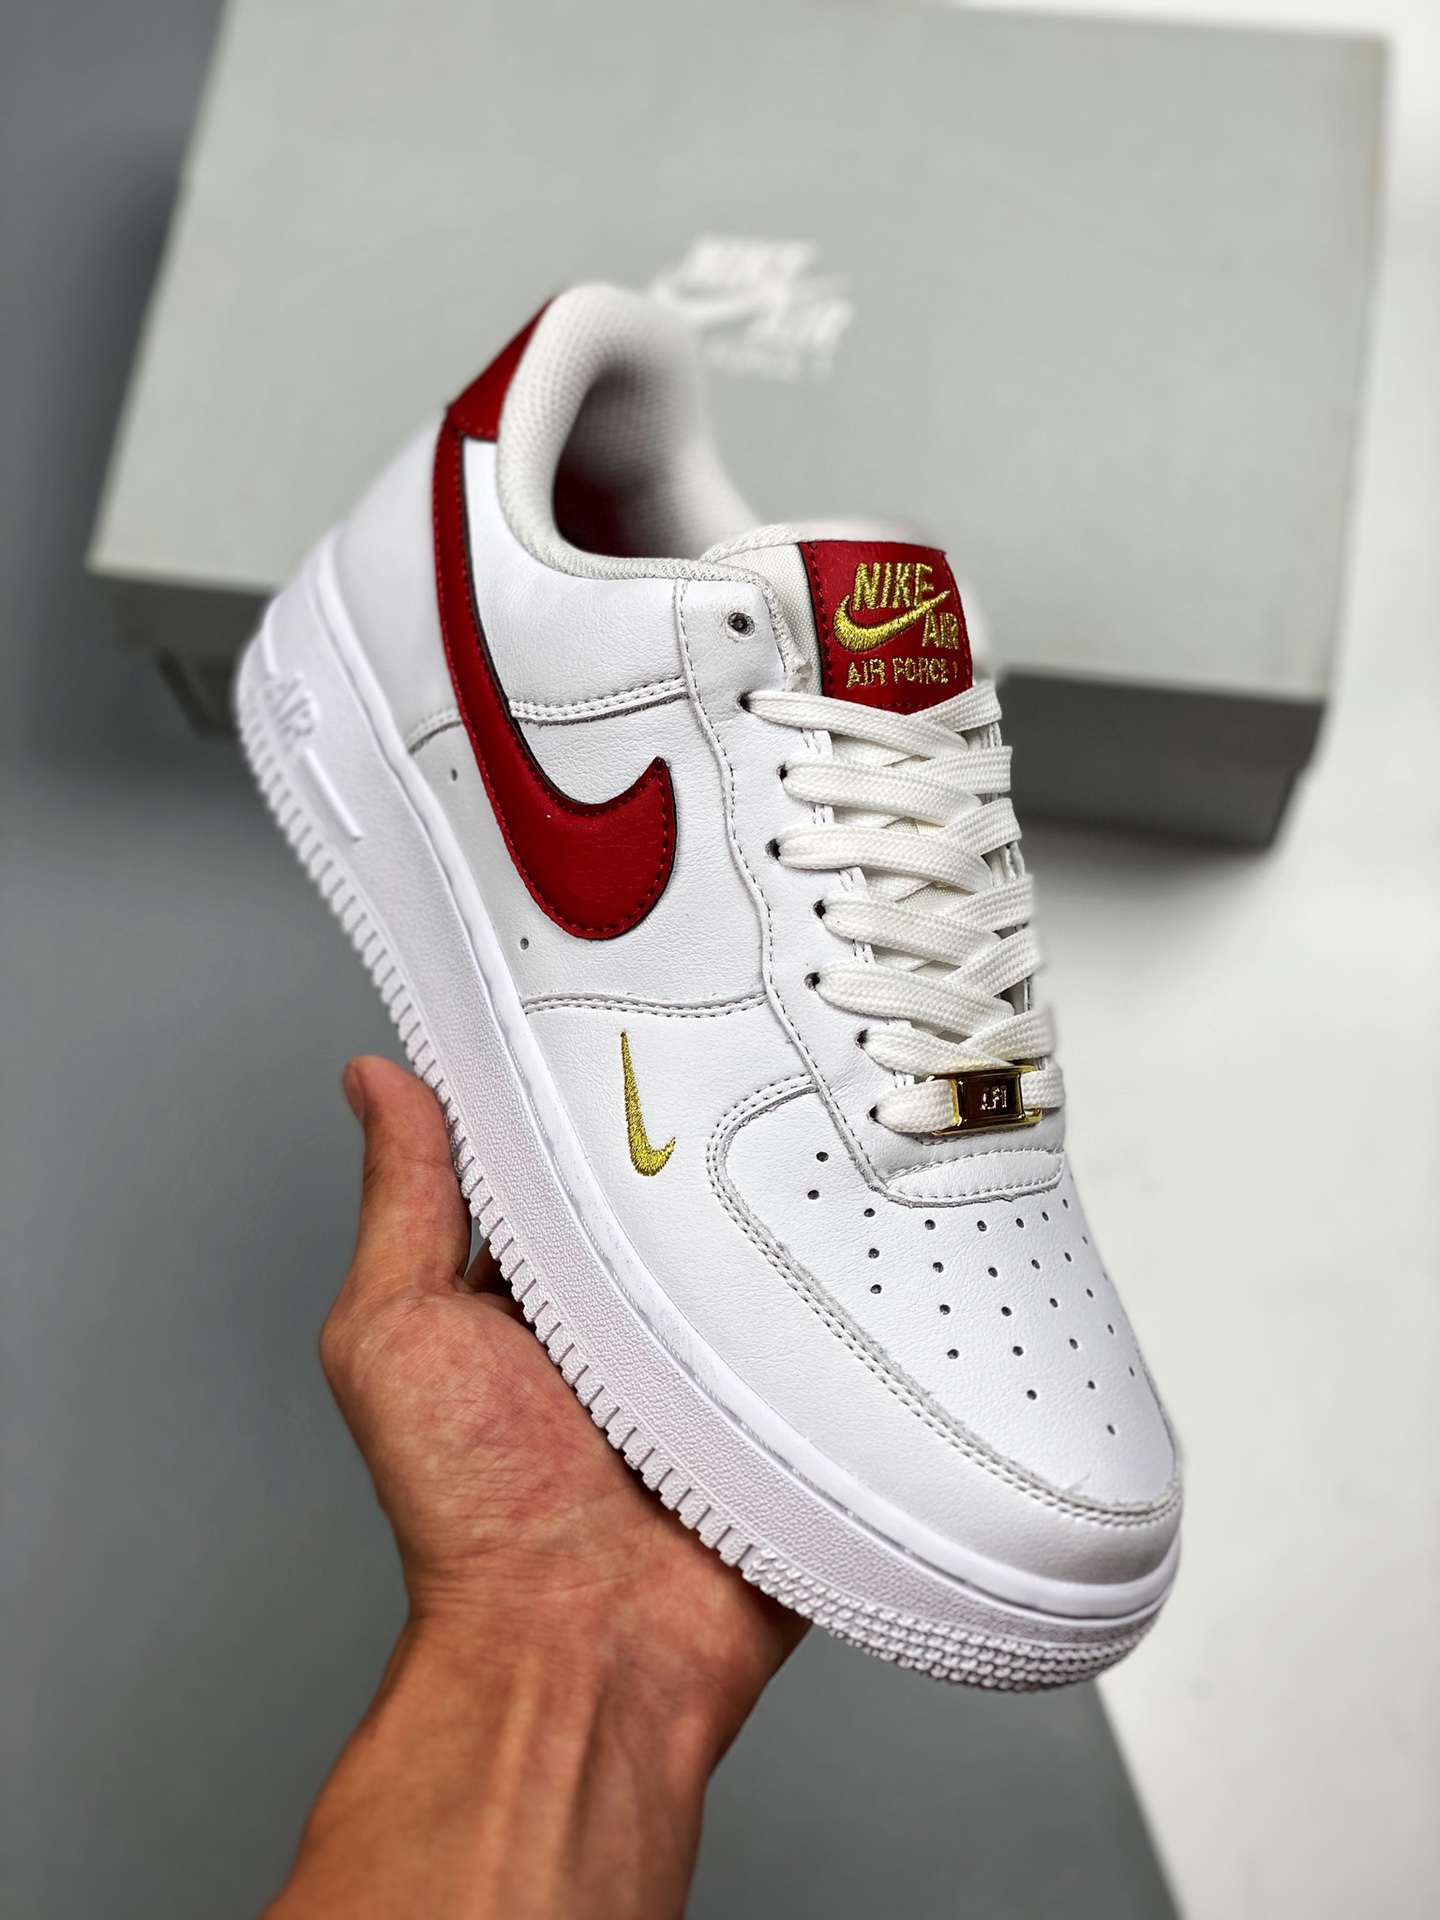 Nike Men's Air Force 1 '07 Shoes, Size 9, White/Red